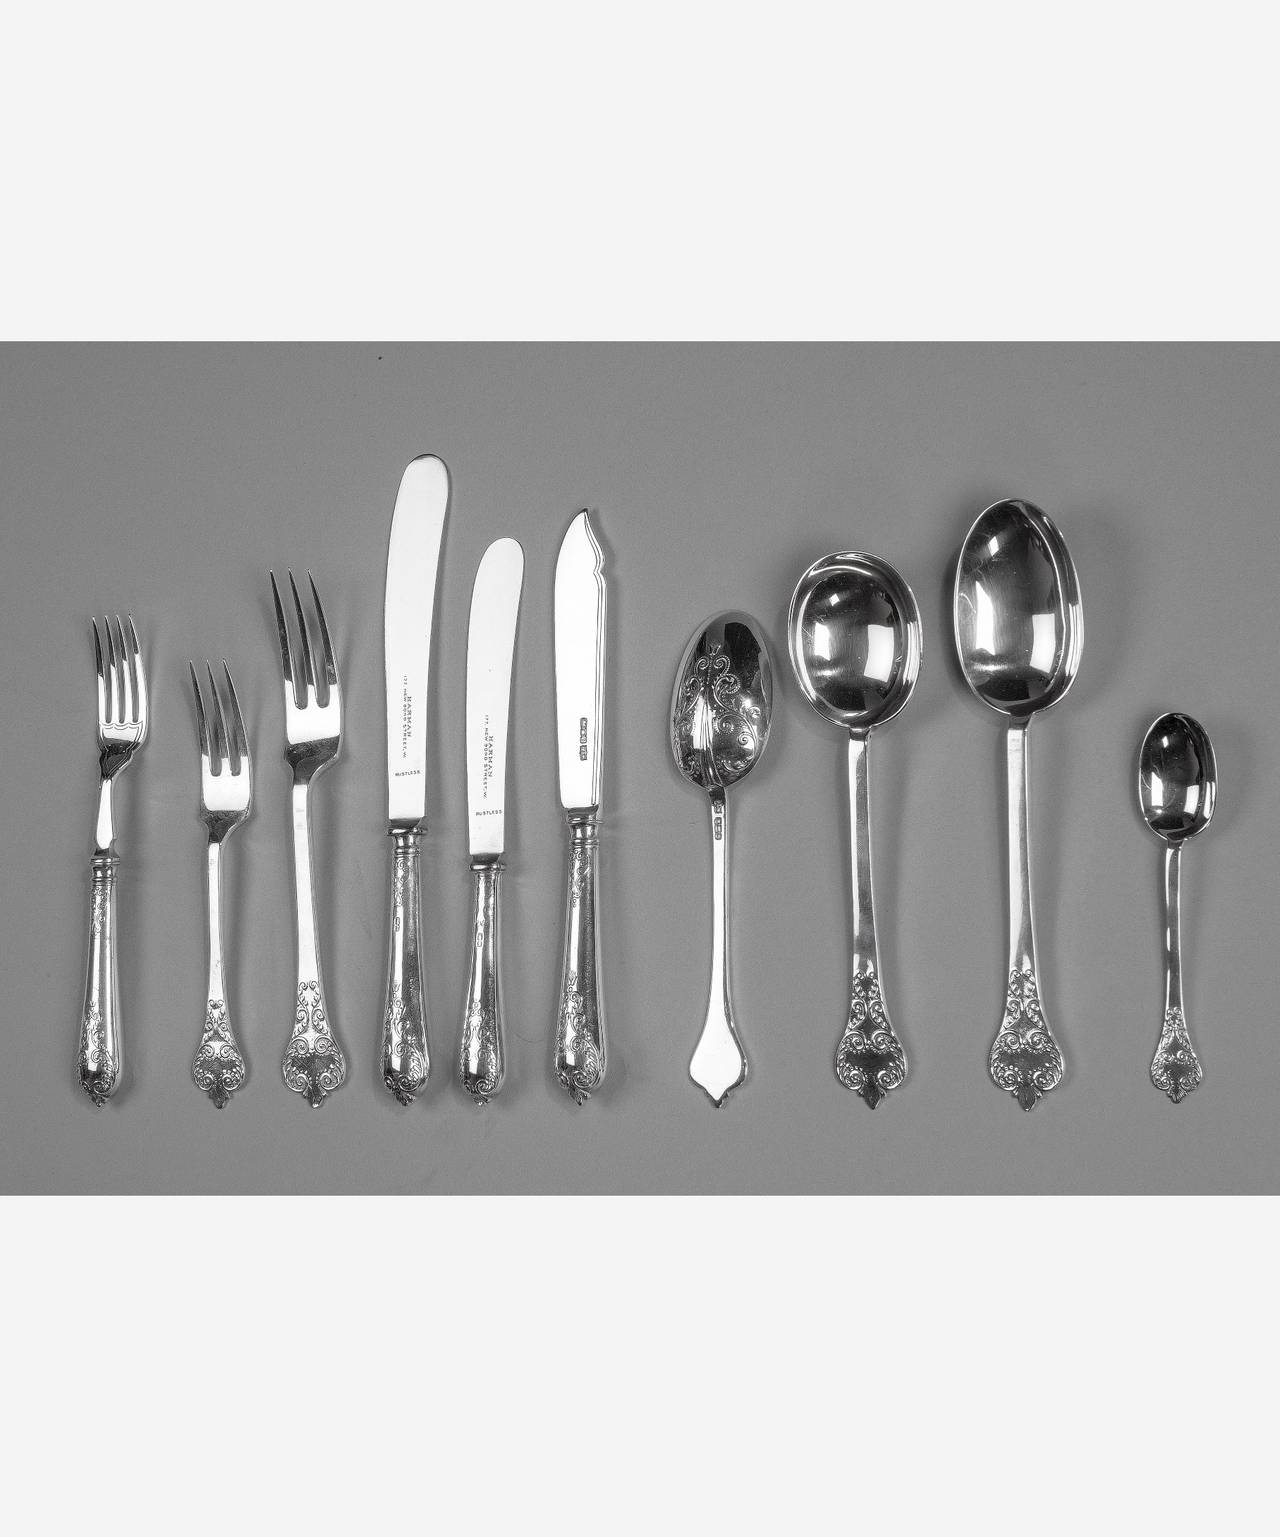 An extensive sterling silver canteen of cutlery in the trephid lace back pattern by Mappin and Webb. Hallmarked Sheffield, 1917.

12 place settings including original knives.

Settings for soup, fish, starter, main course, dessert and tea